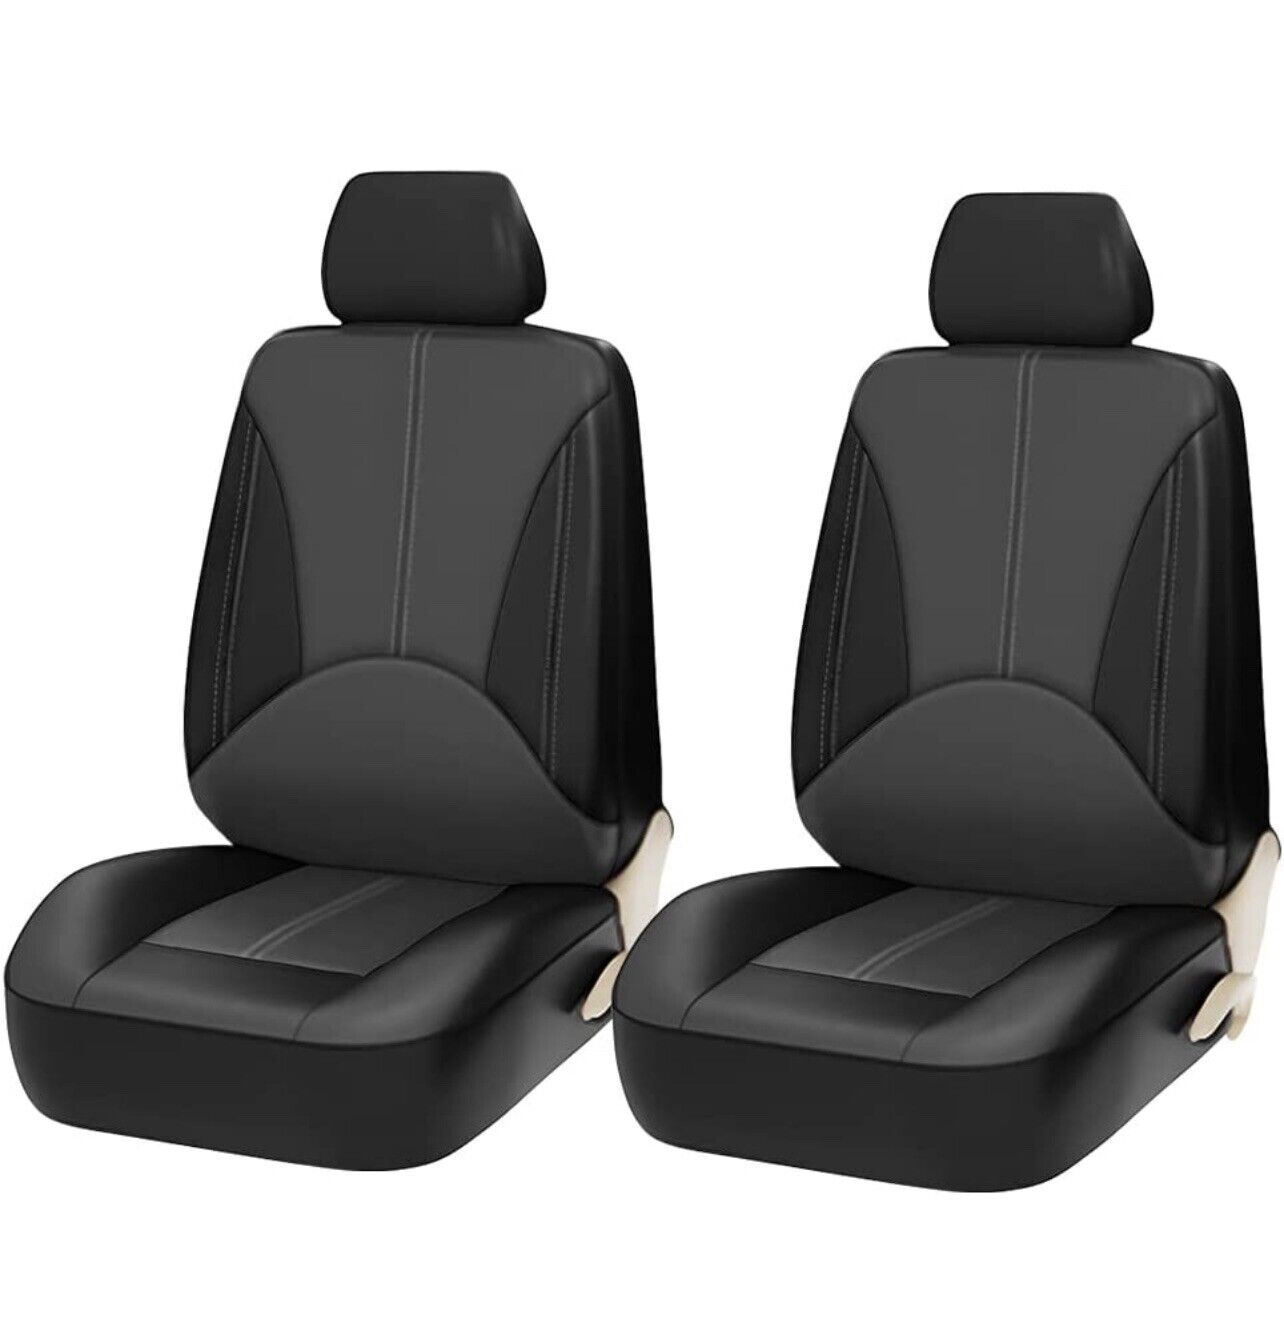 Gray Universal Breathable PU Leather Car Seat Cover Front Seat Cover 1 pair